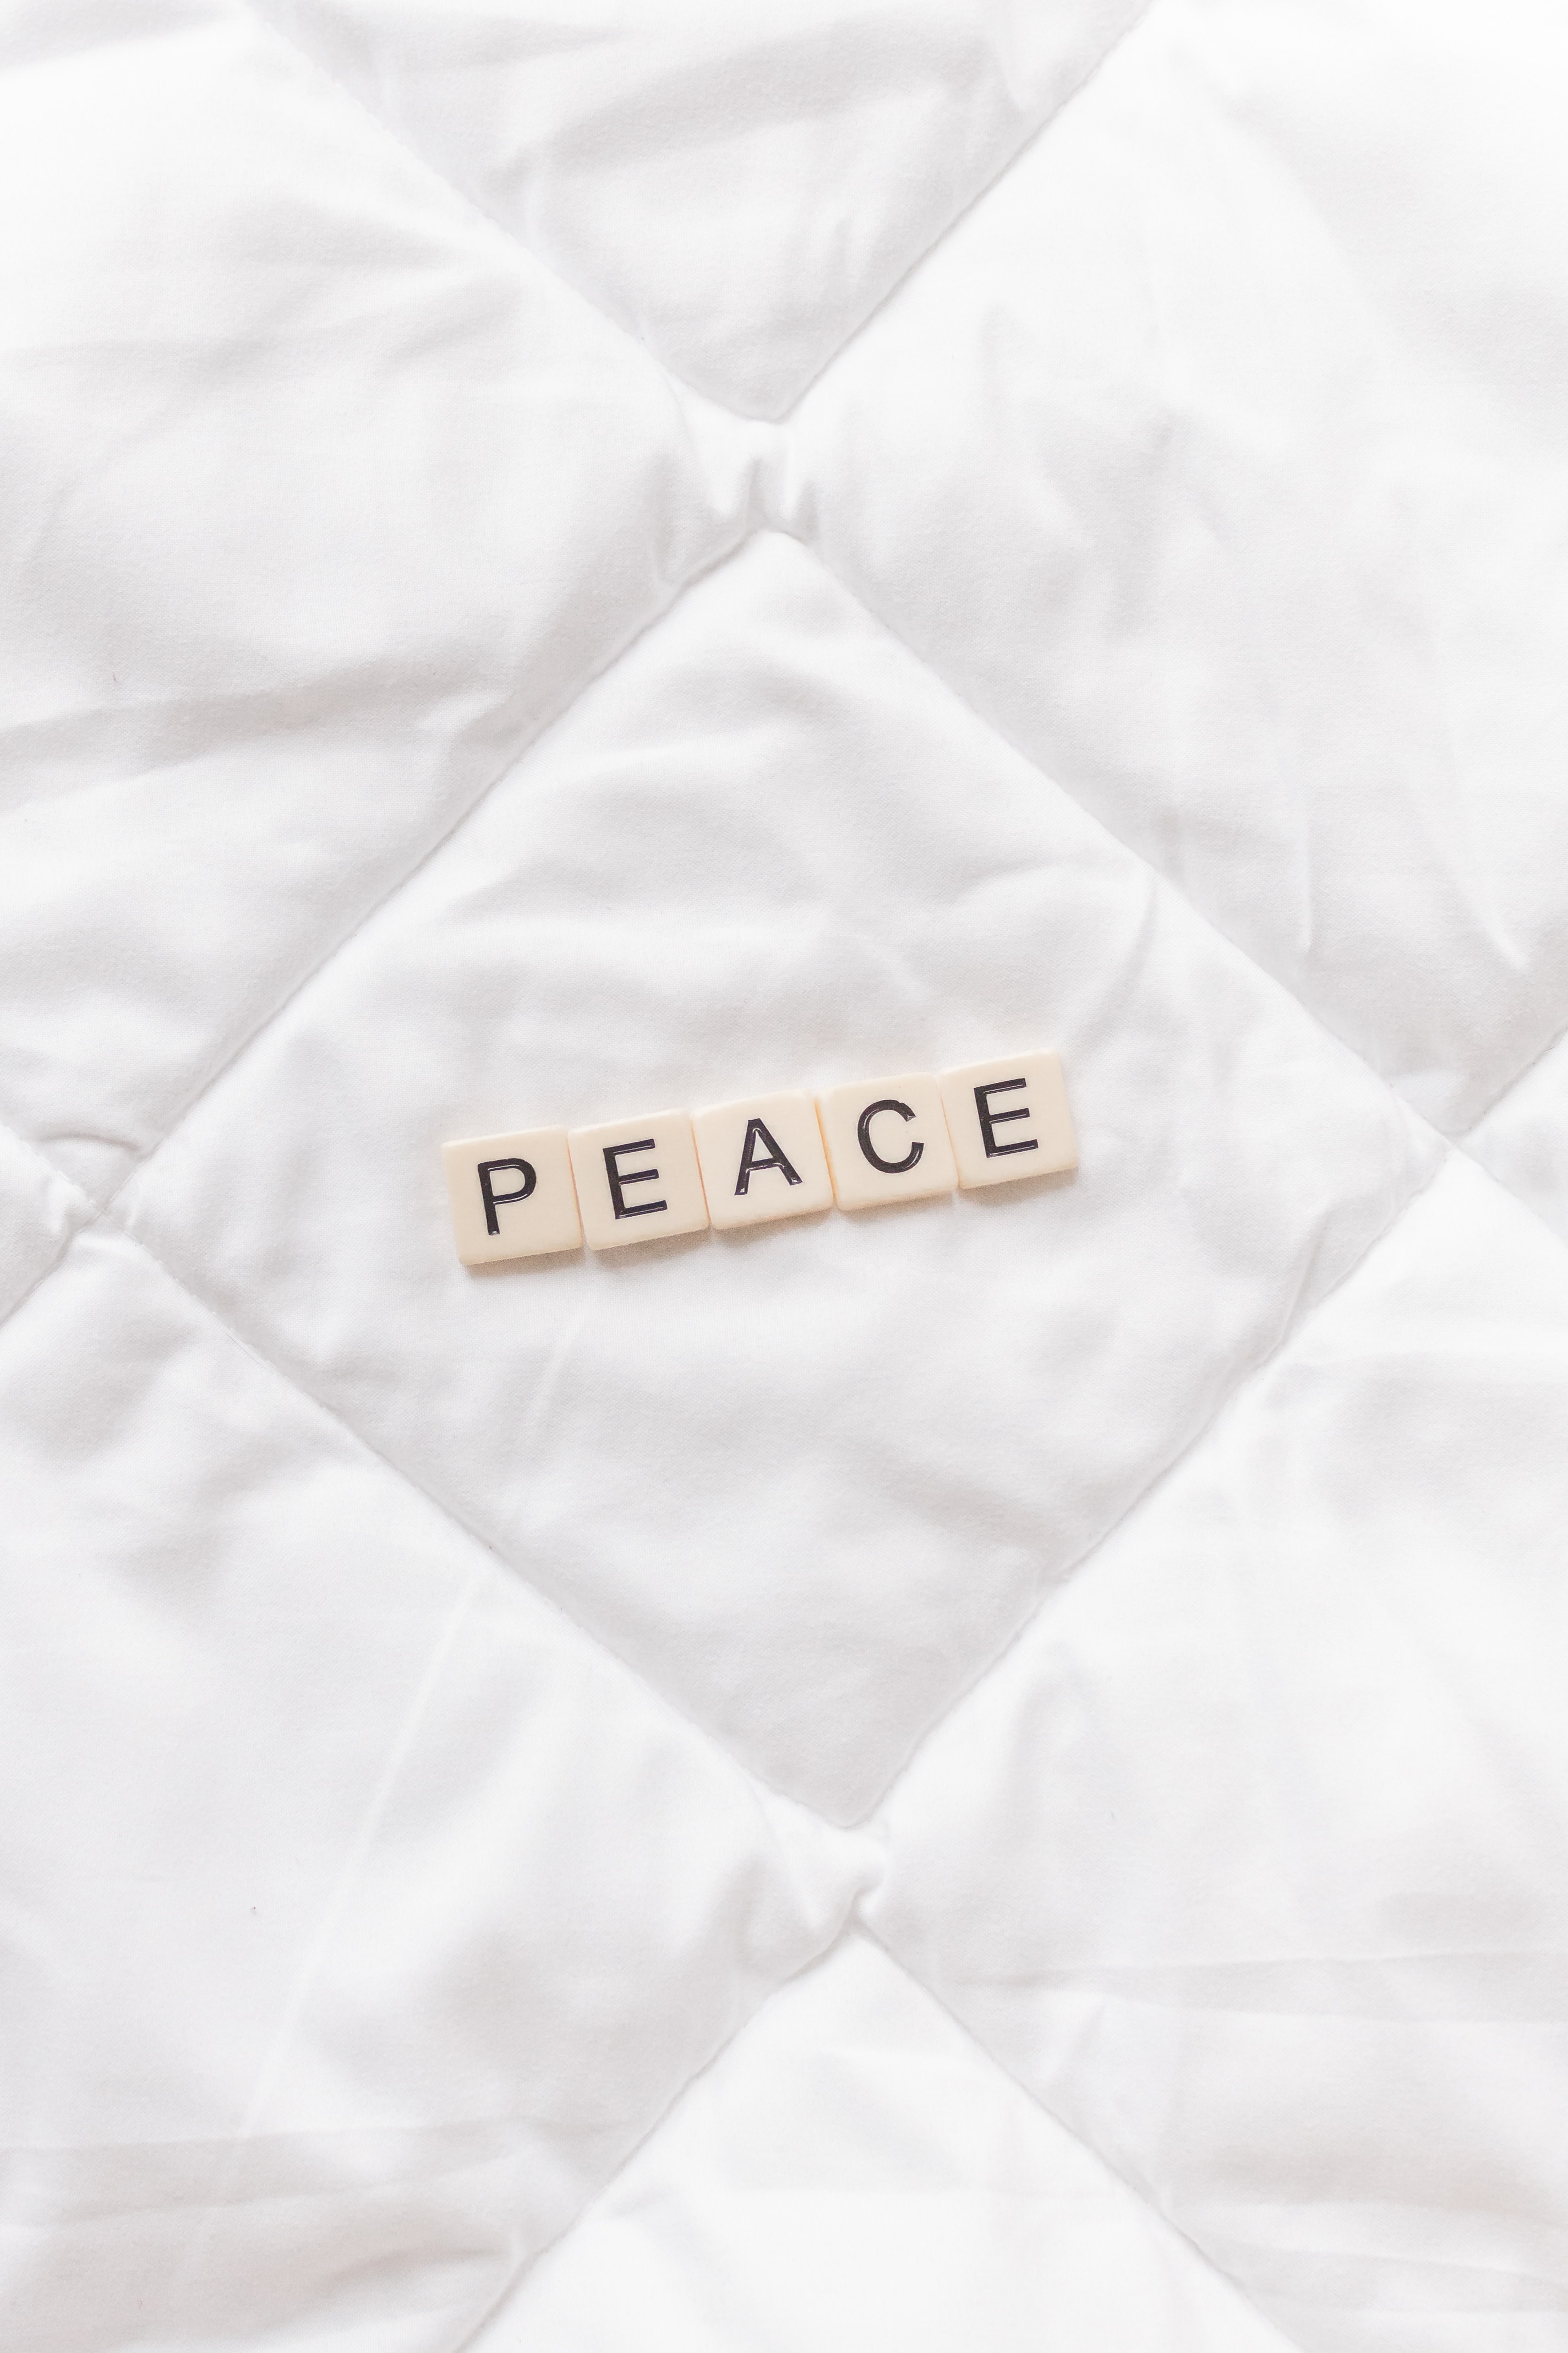 peace, word, cubes, words, cloth, inscription, world Smartphone Background